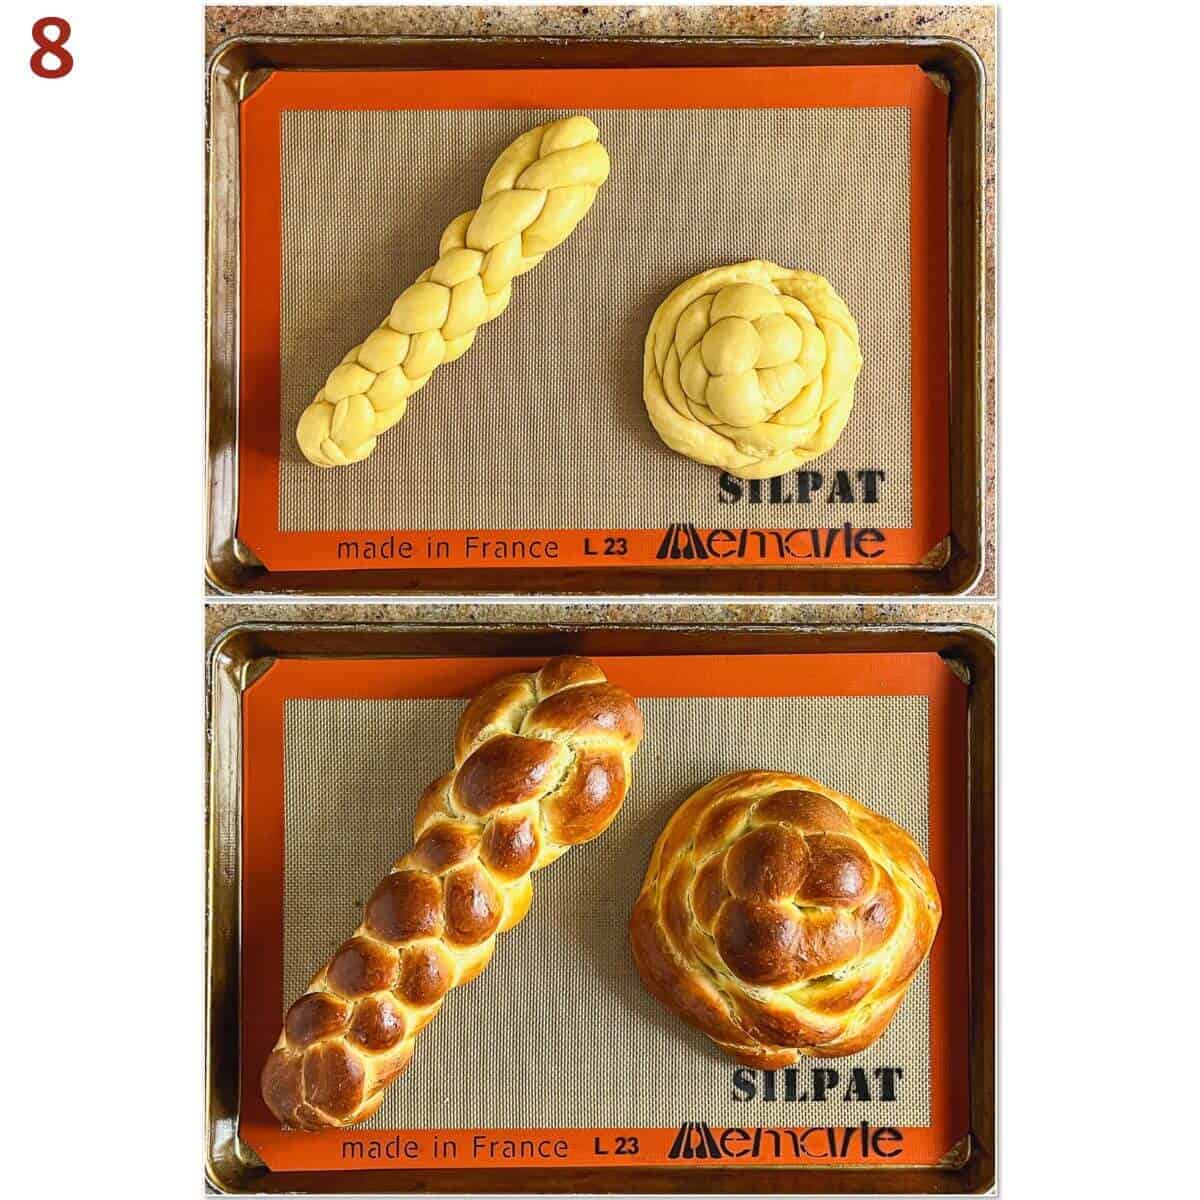 Four strand challah on a baking pan before and after baking.